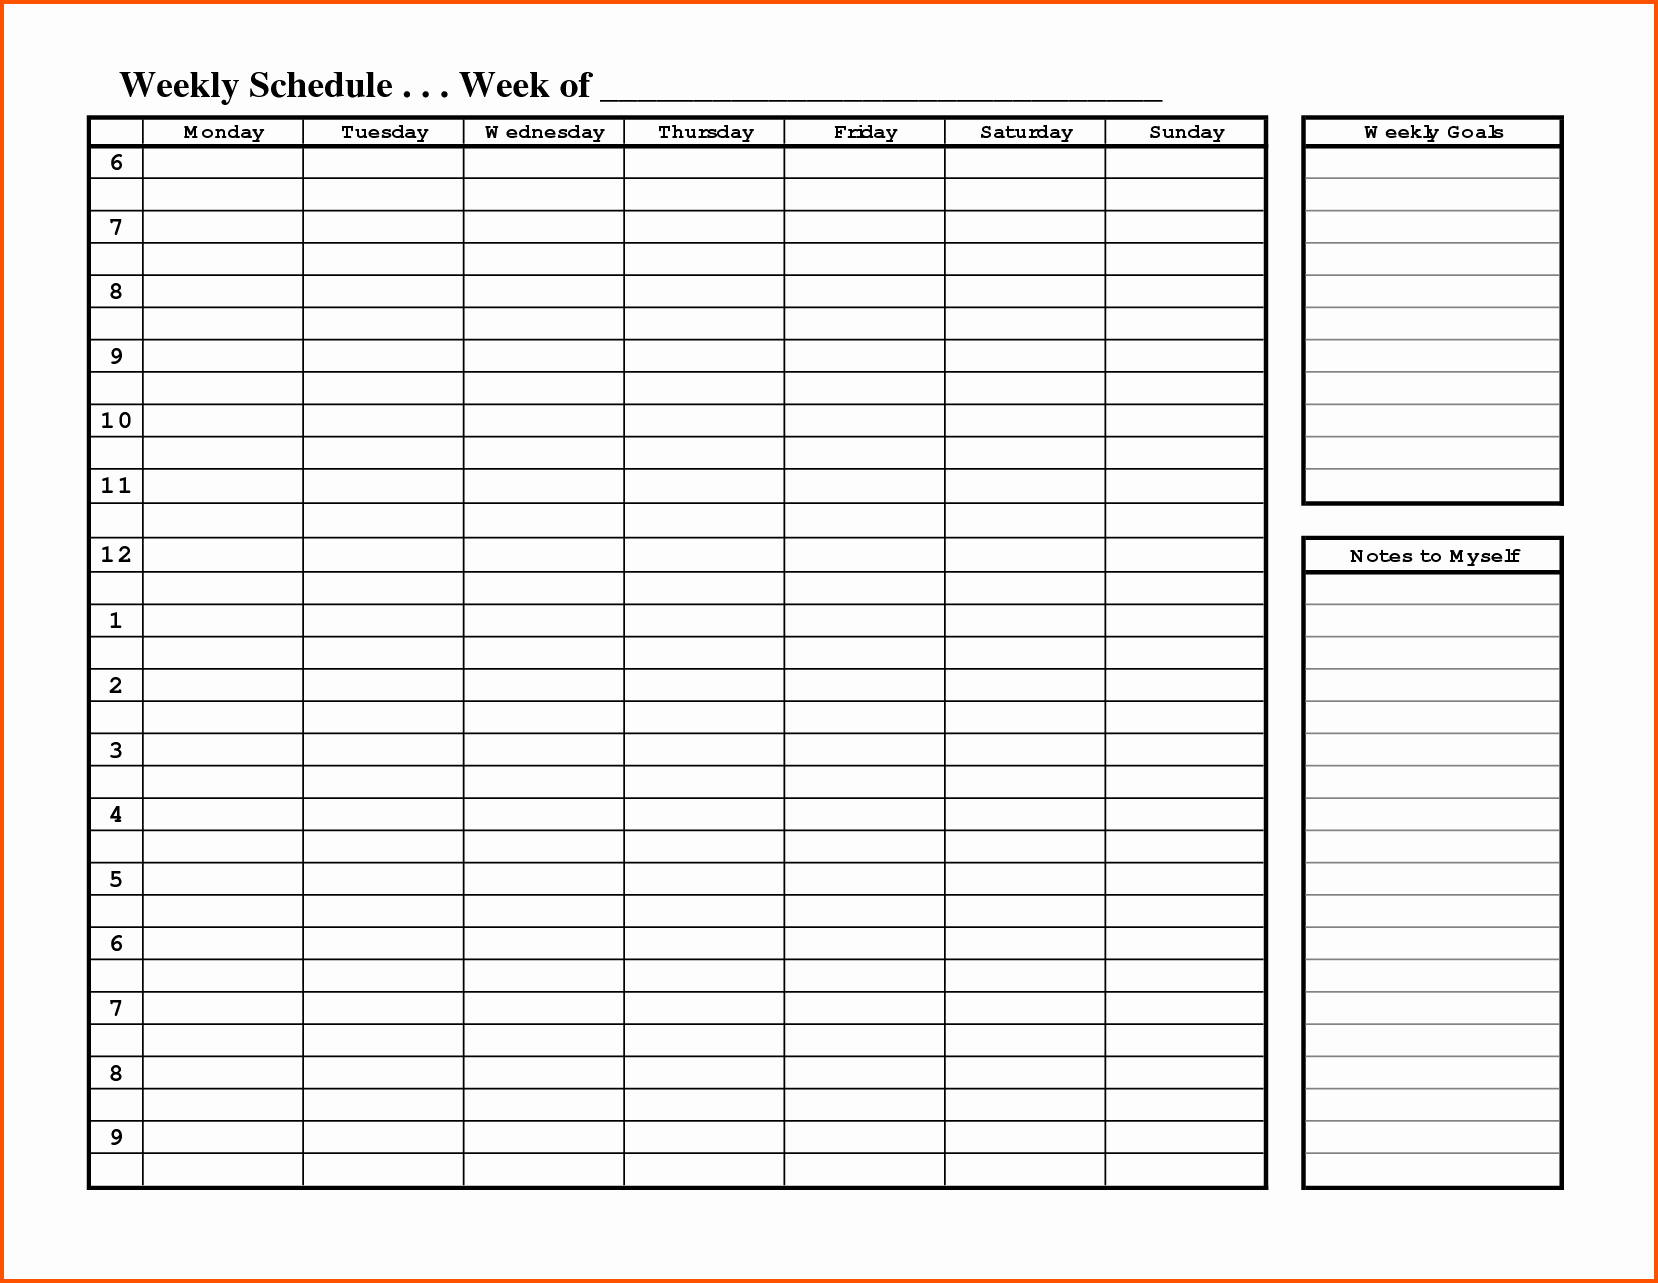 Weekly Schedule with Times Template Elegant Weekly Schedule Template for Your Inspirations Vatansun